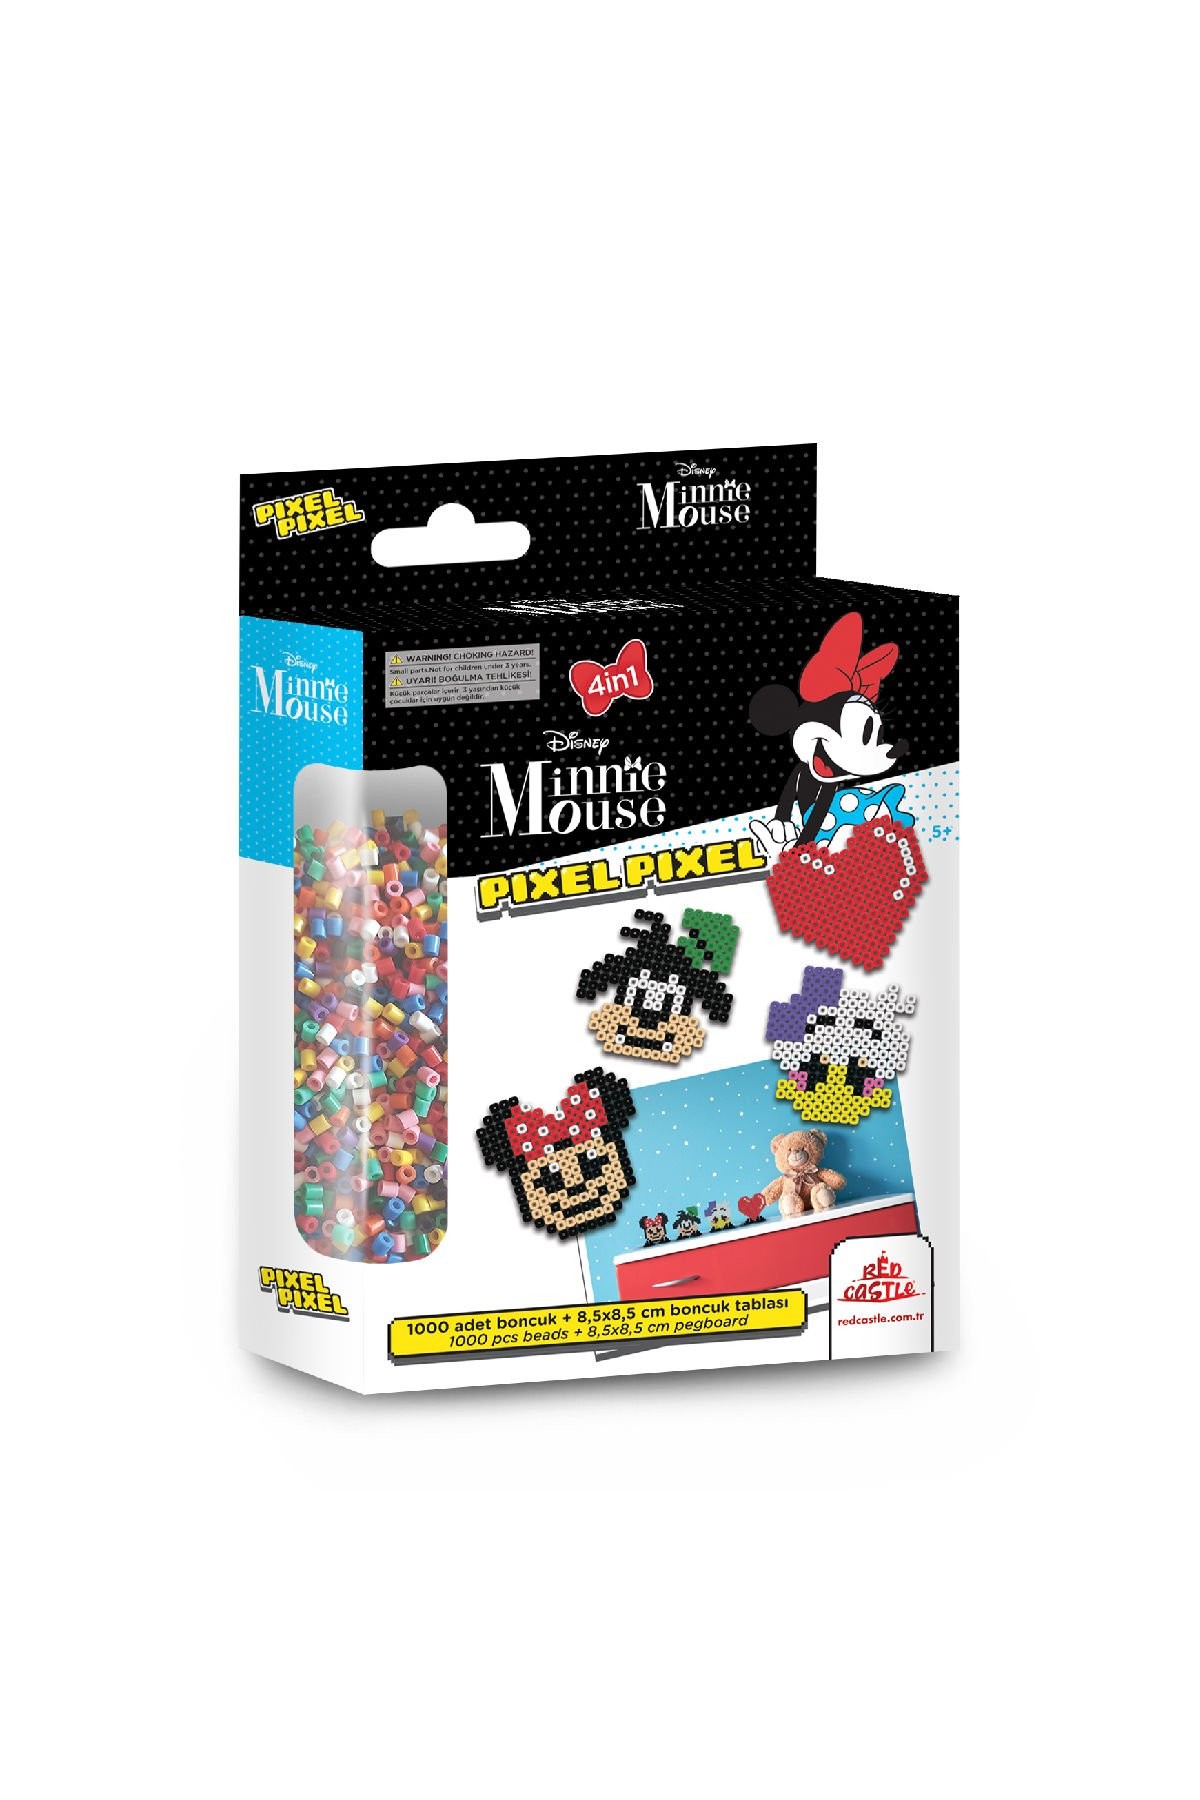 Pixel Pixel Beads Activity and Toy Set-Disney Minnie Mouse 1000 Beads BB16-04